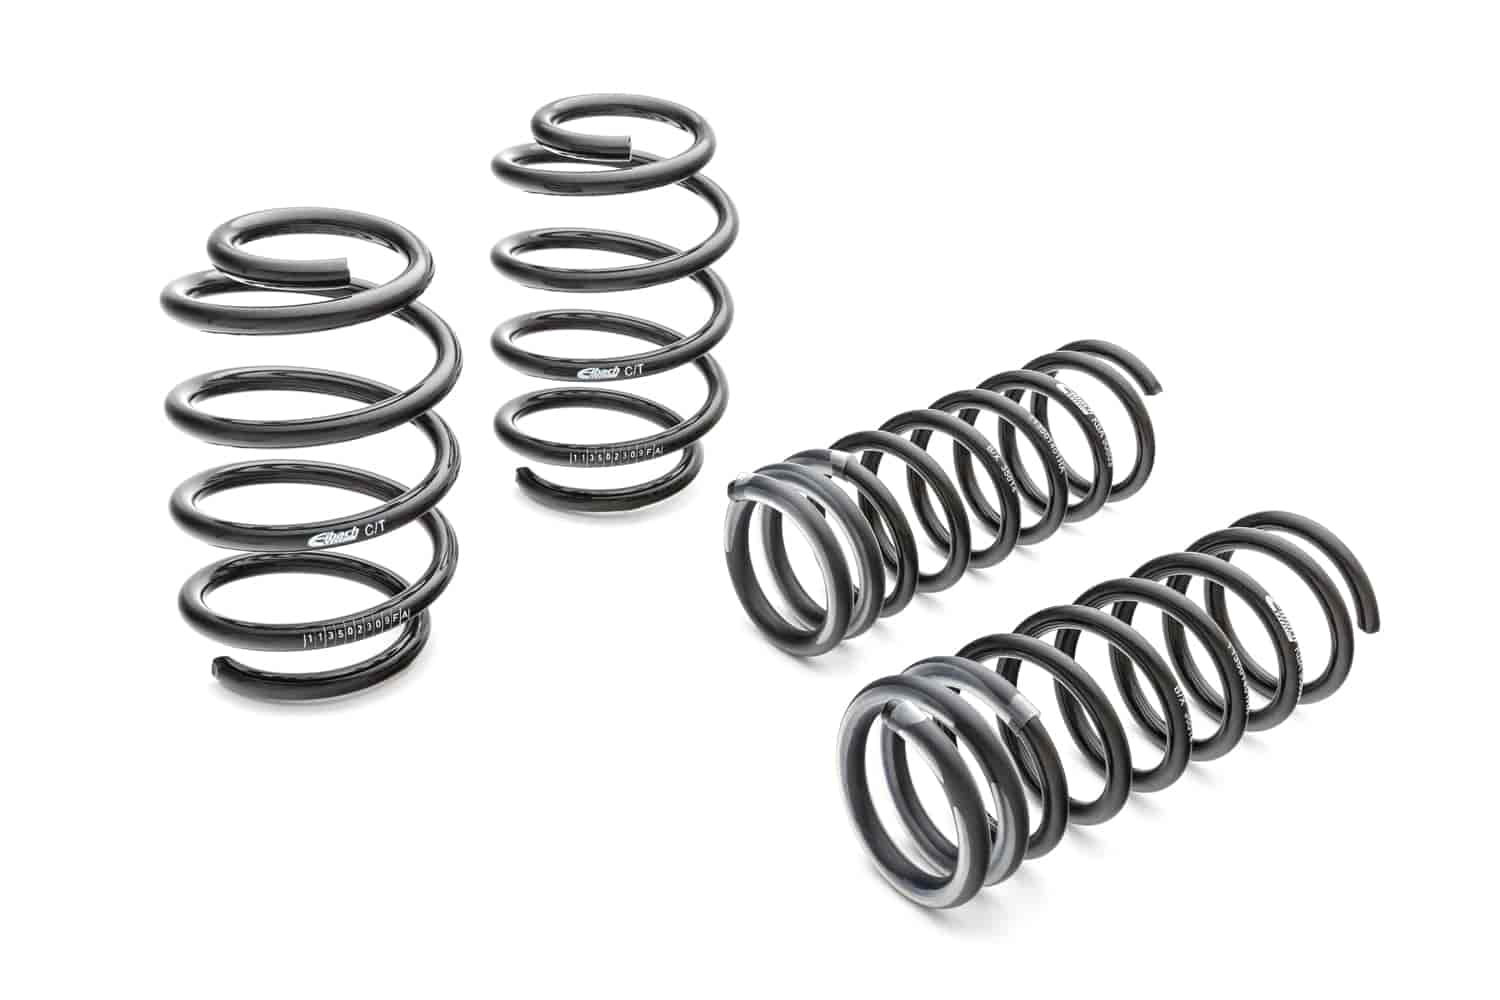 E10-20-031-10-22 Pro-Kit Lowering Springs 2015-2016 BMW M4 Convertible - .800 in. Front/.600 in. Rear Drop